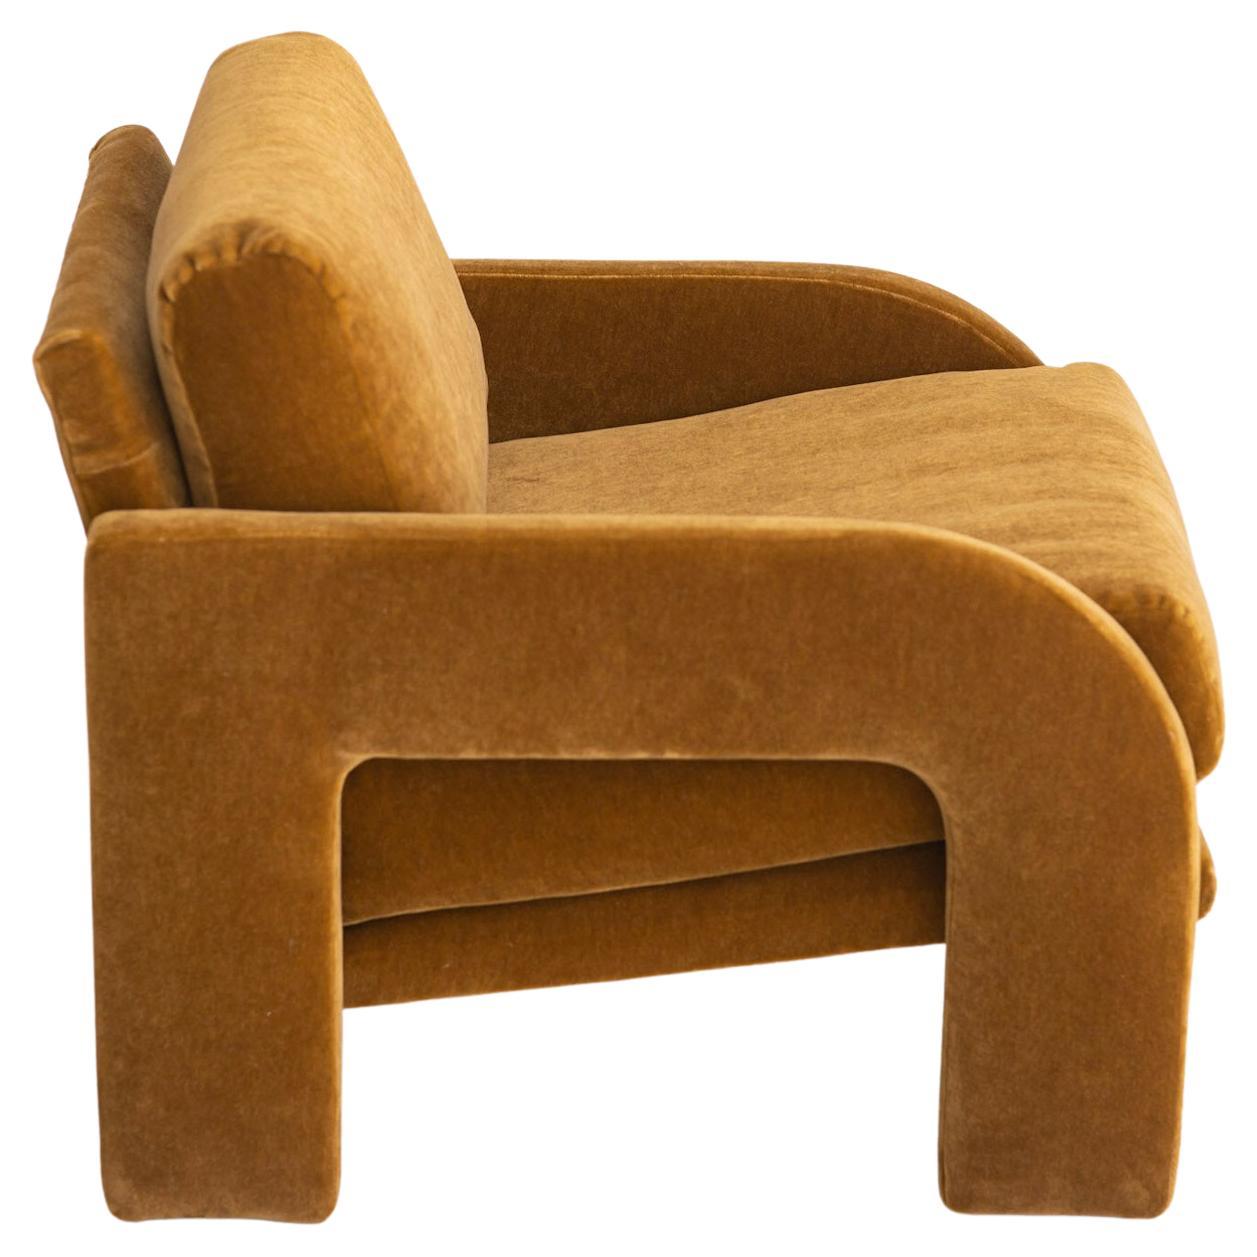 1980s Postmodern Architectural Armchair in Camel Mohair